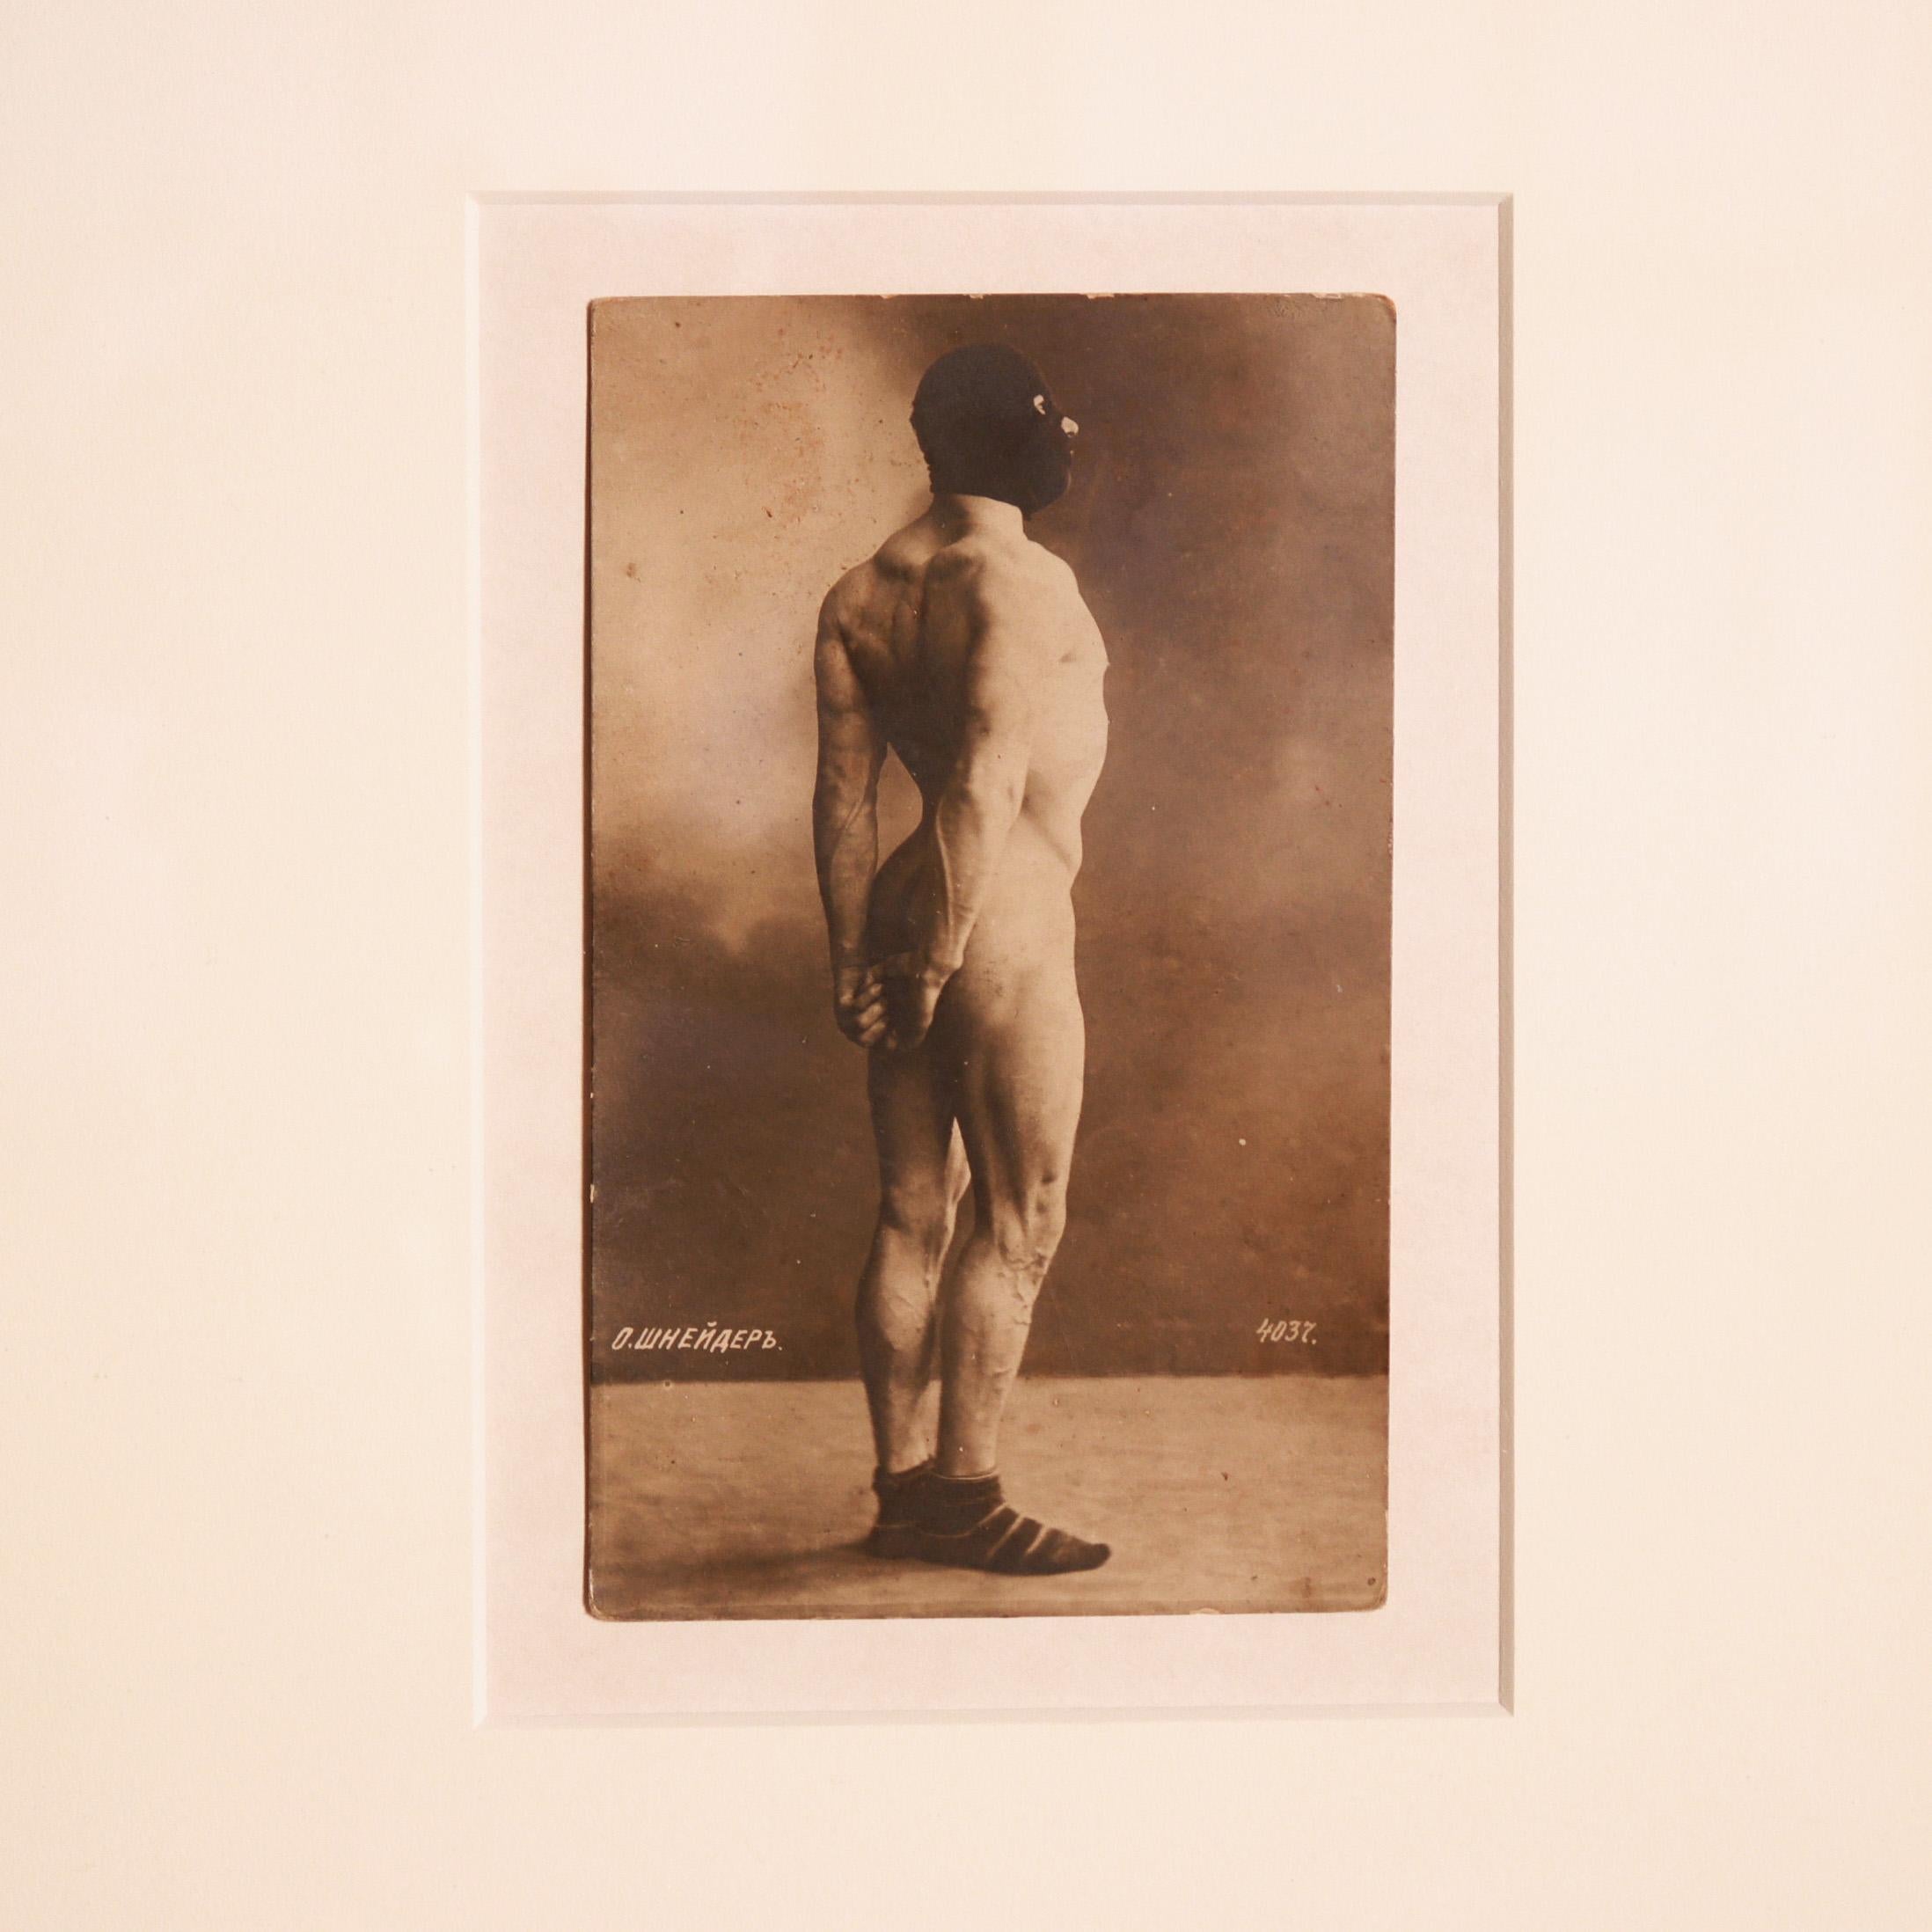 ‘Schneider’, a turn of the 20th century uncirculated sepia-toned homoerotic Russian bodybuilder photo-printed postcard.
In the late 19th and early 20th centuries, strongmen were circus performers who exhibited great feats of strength. Many of these